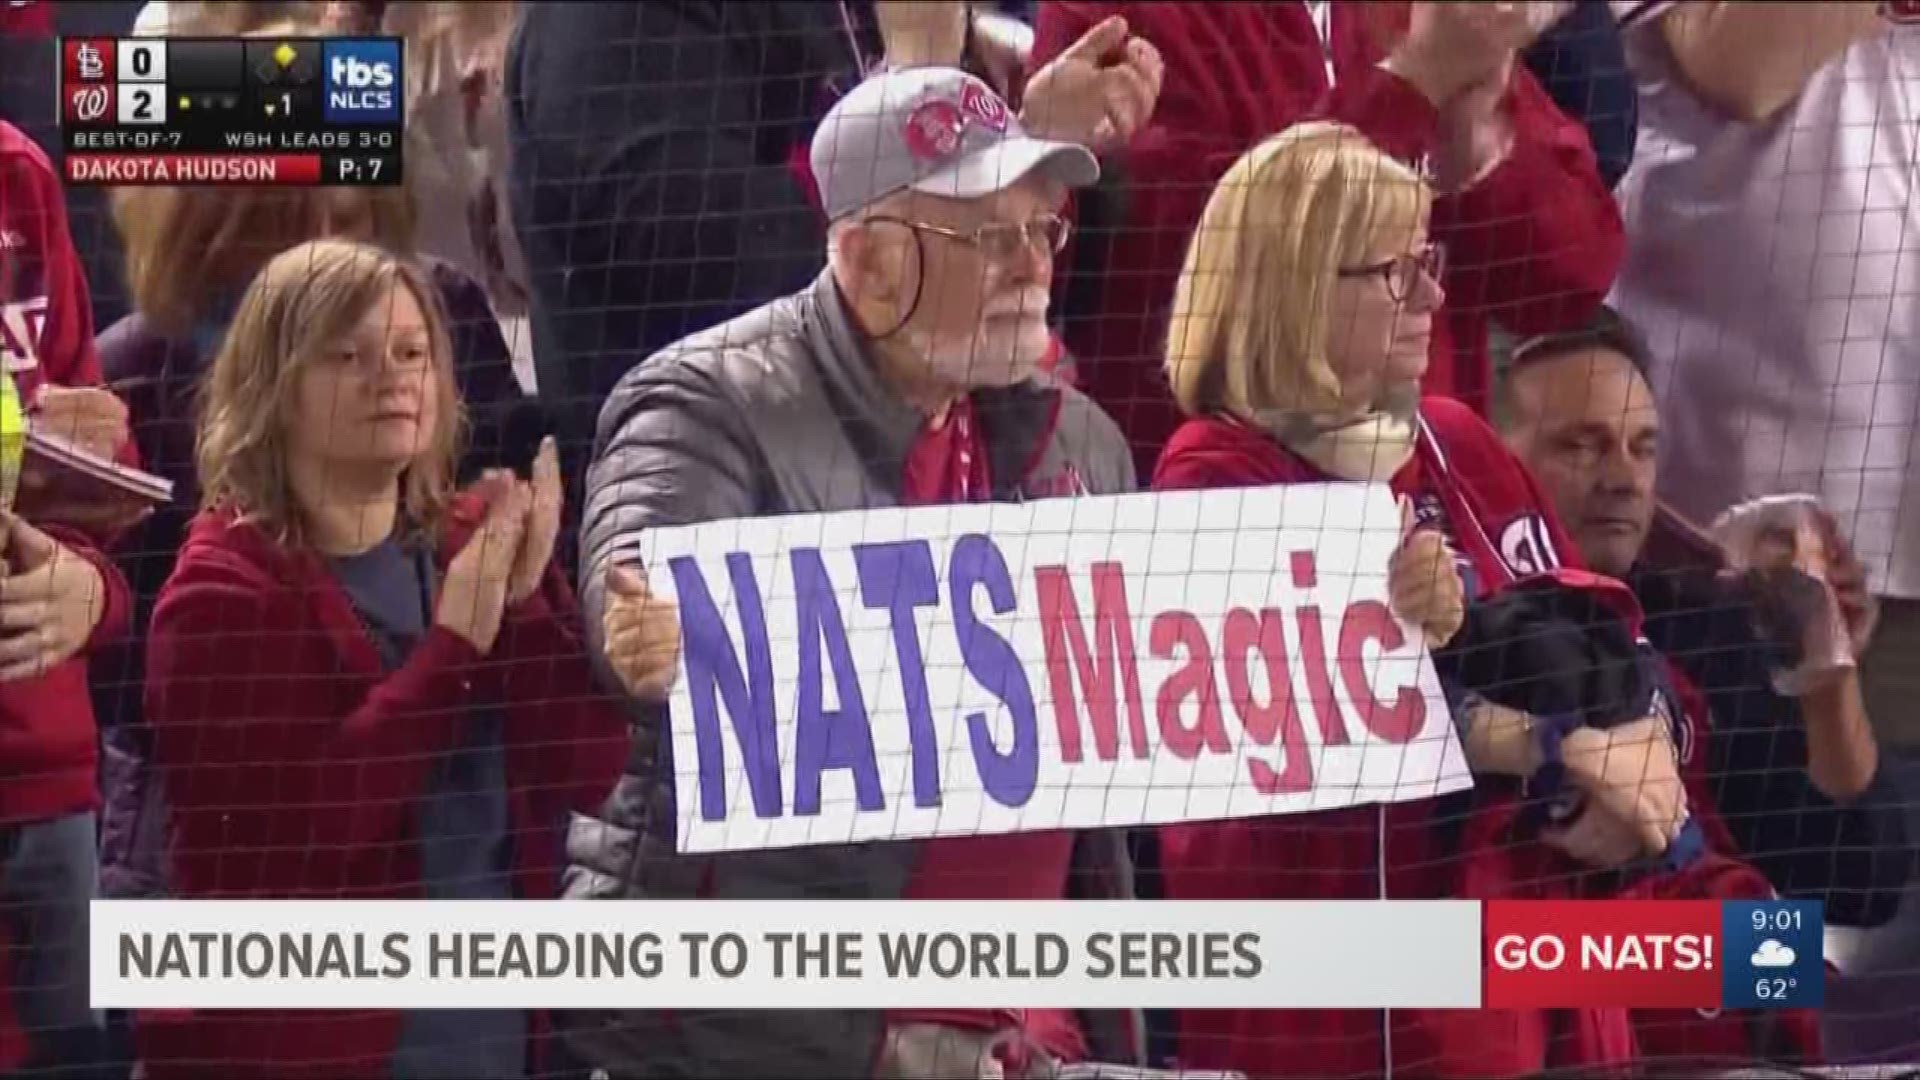 The Washington Nationals are headed to the World Series after sweeping the St. Louis Cardinals. Check out the excitement after the game!